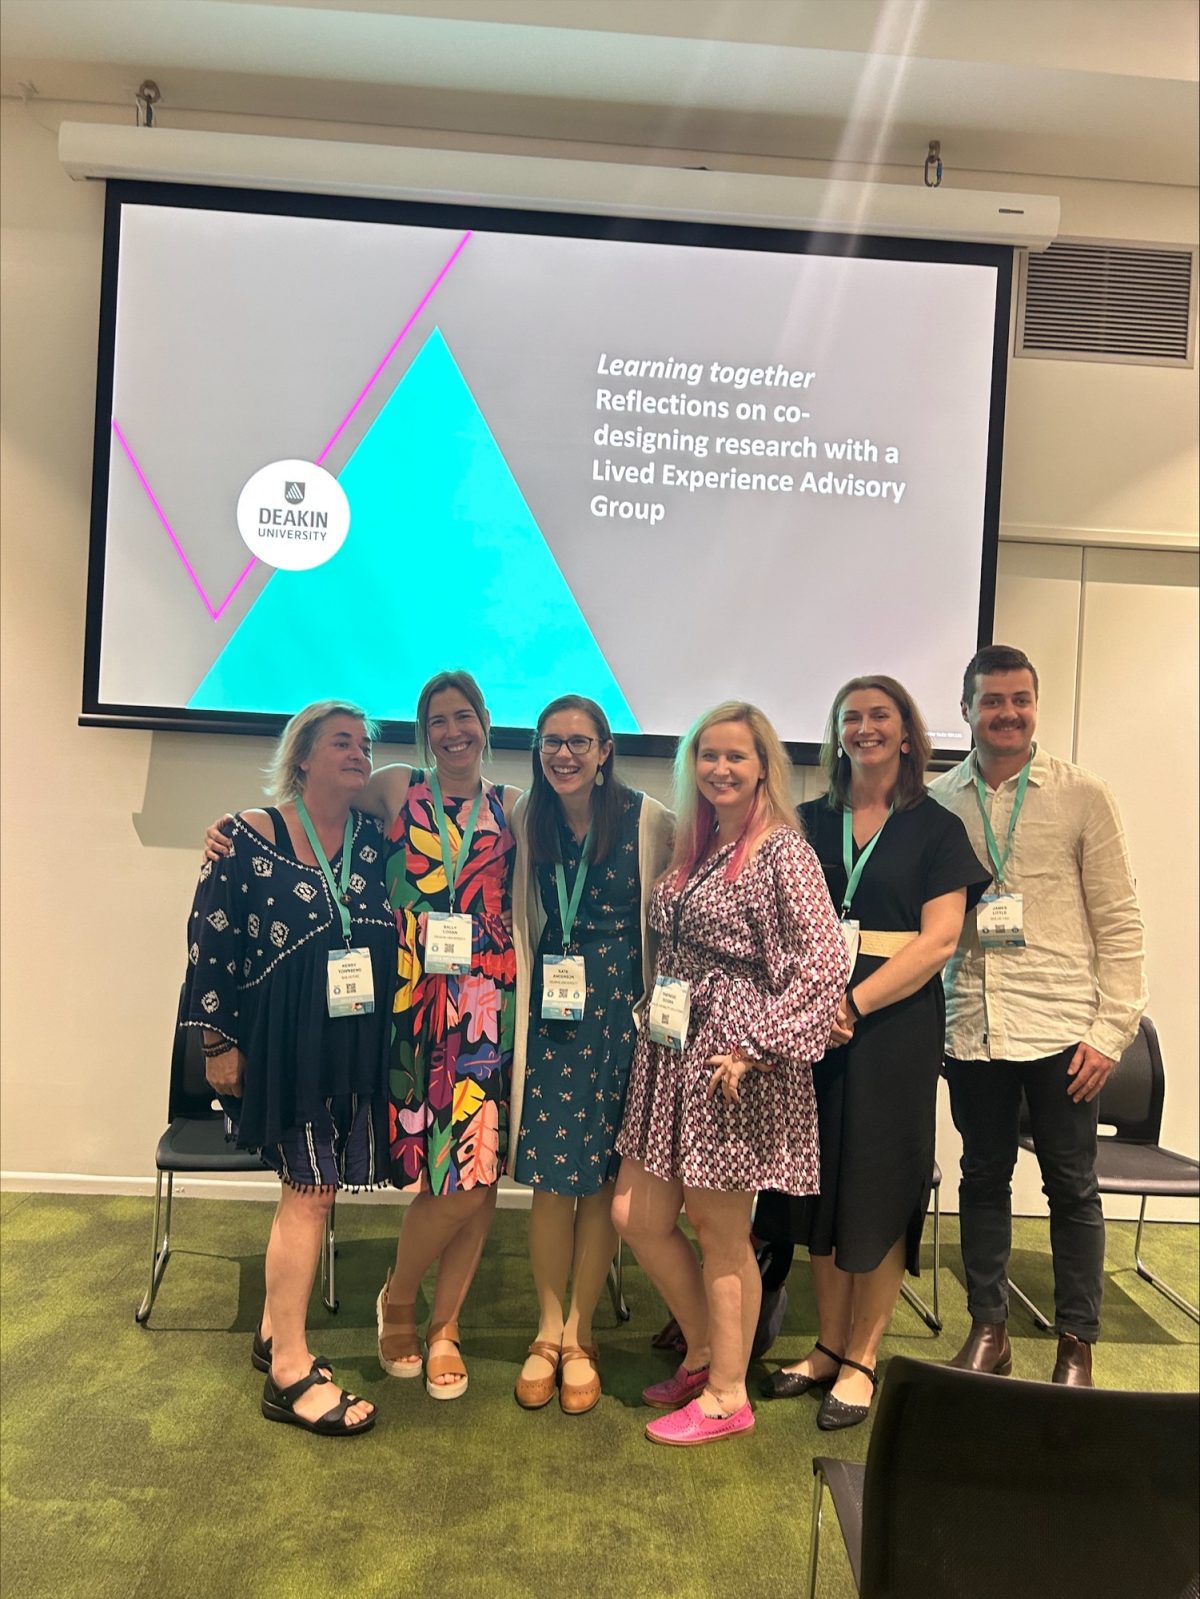 Team members Kerry Townsend, Sally Logan, Kate Anderson, Therese Dogra, Valerie Watchorn, and James Little are smiling and posing in front of a slide titled "Learning Together: Reflections on co-designing research with a Lived Experience Advisory Group", displayed on a large digital presentation screen.